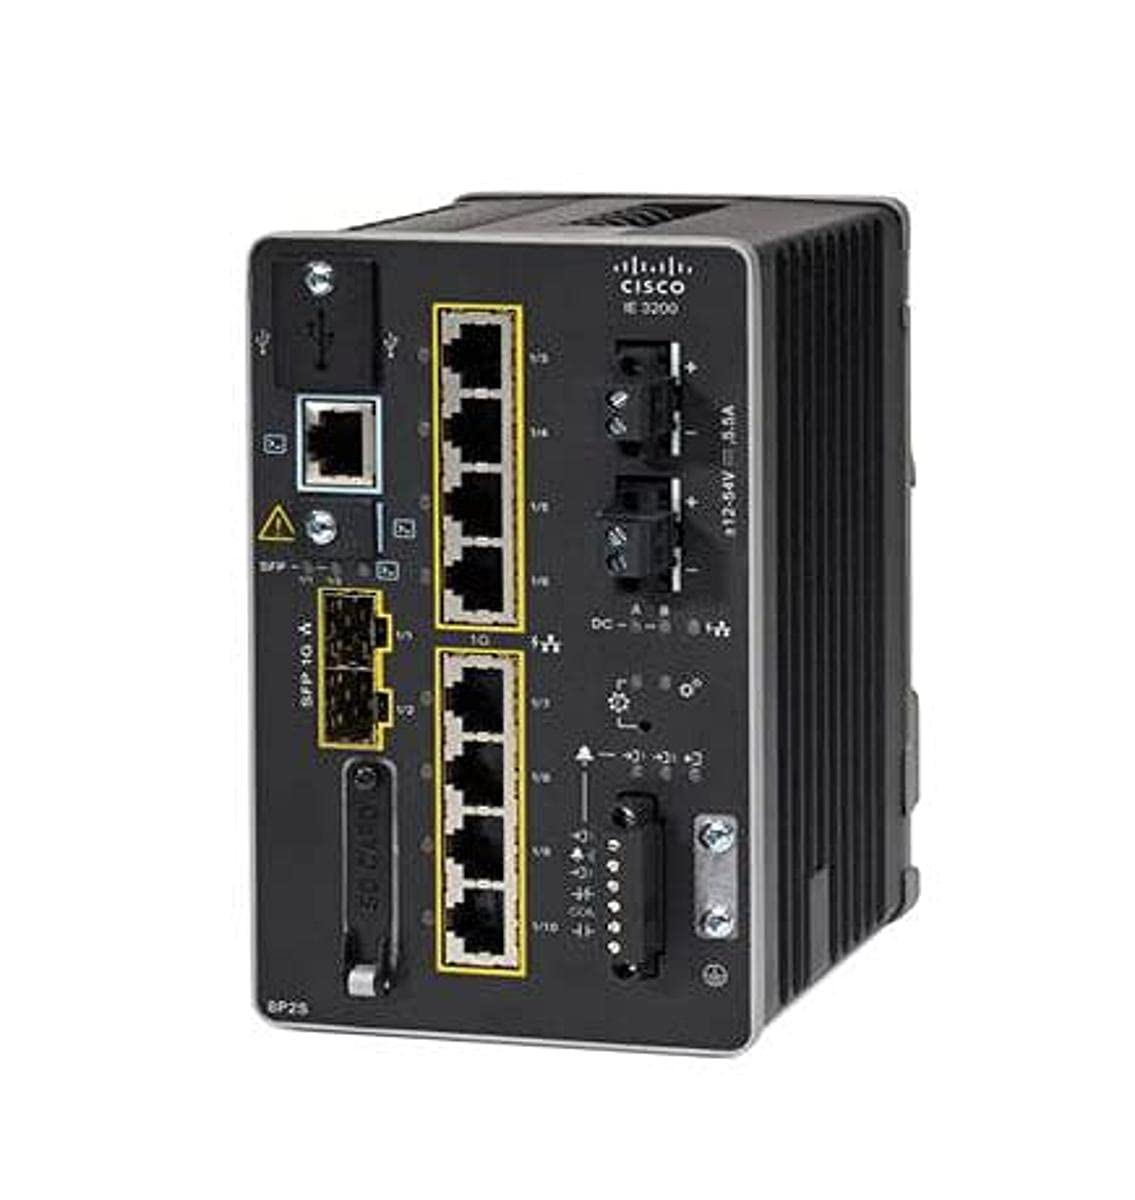 CATALYST IE3200 RUGGED SERIES